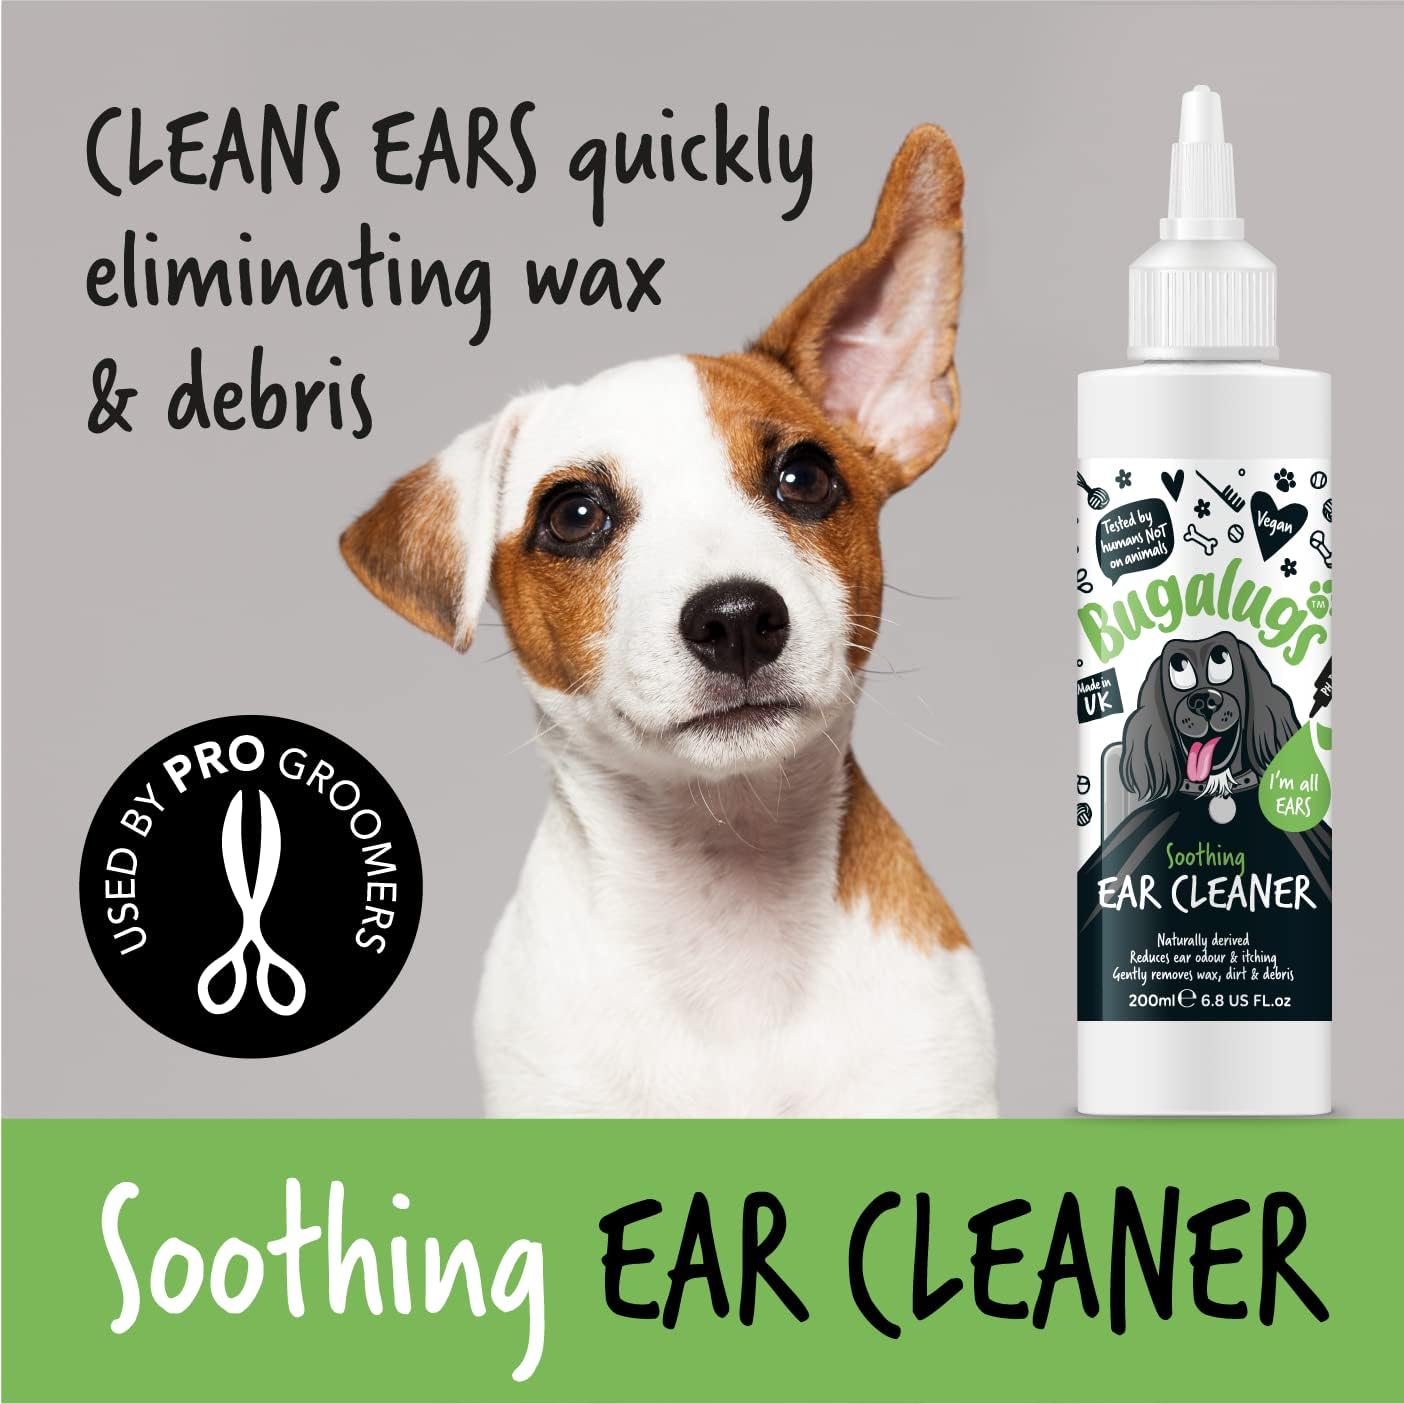 BUGALUGS Ear Cleaner, Dog & Cat Ear Cleaner Solution Softens & Removes Wax, Remedy For Ear Hygiene, Non-Toxic Dog & Cat Ear Drops, Alcohol-Free Stop Head Shaking with Easy Applicator :Pet Supplies